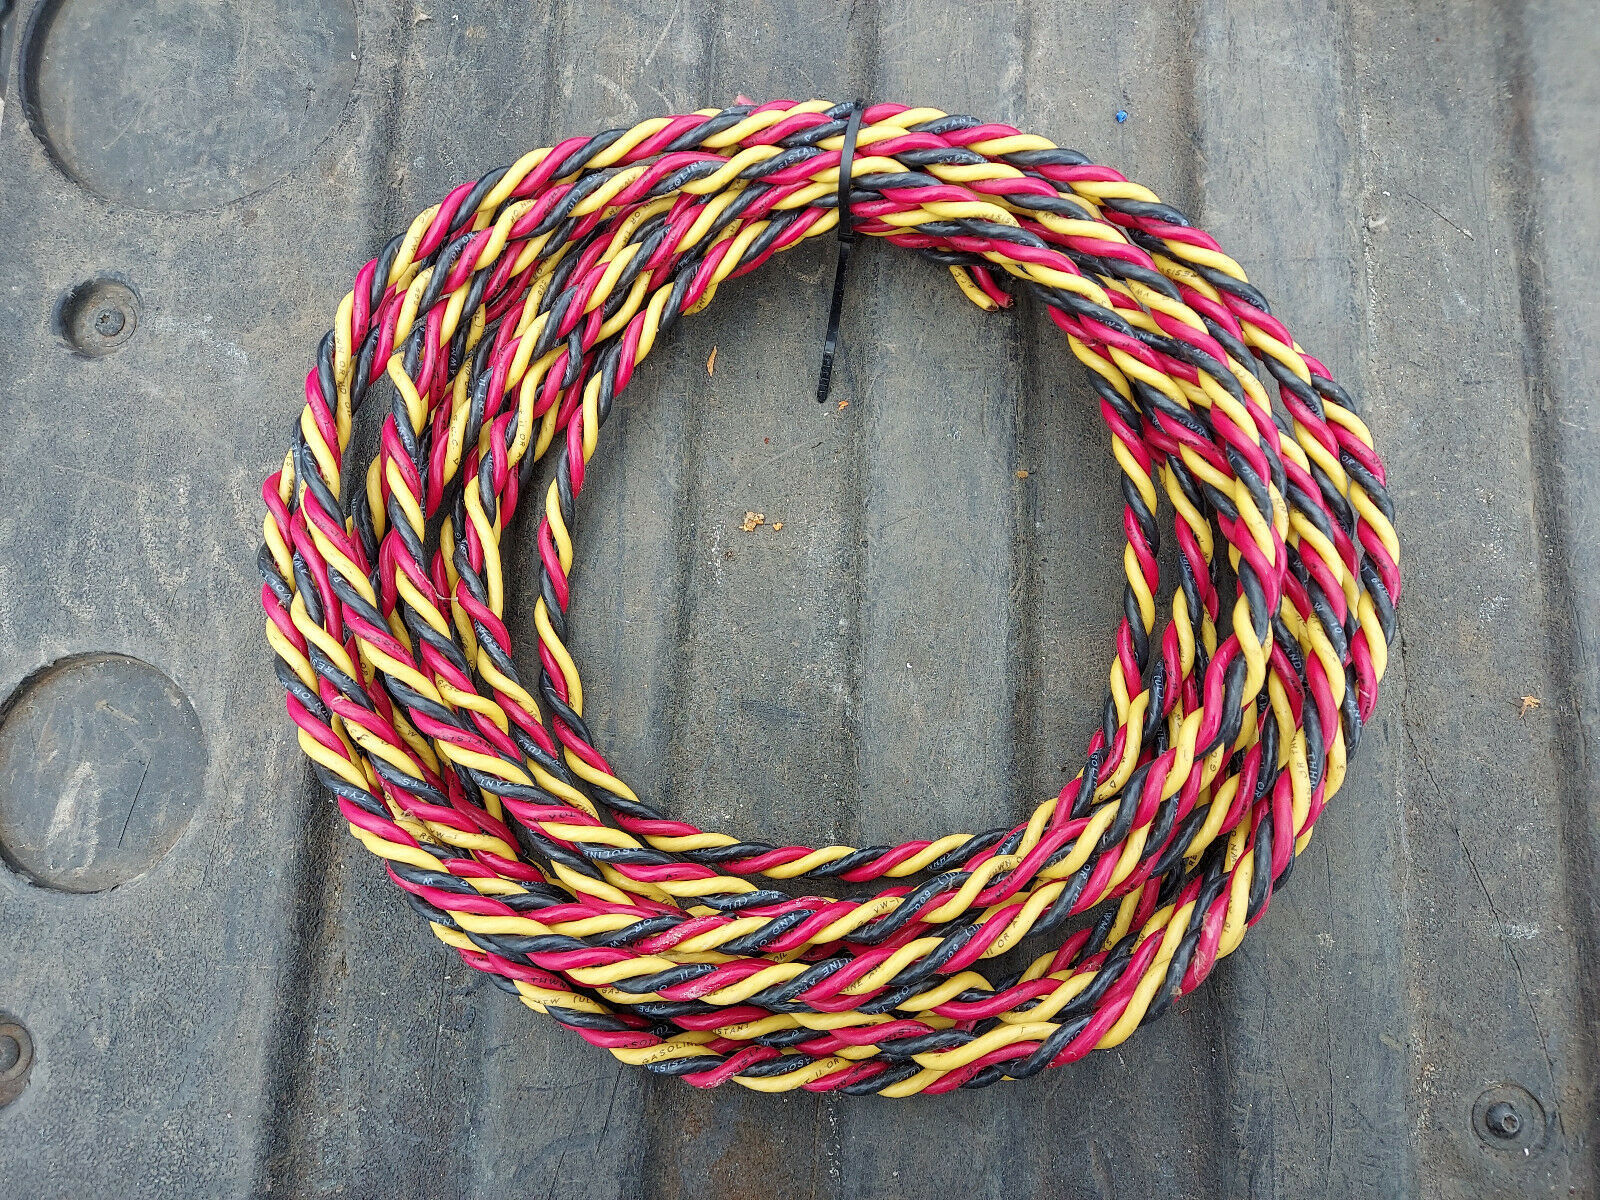 22FF98 WIRE, 30' LONG, 10/3 TWIST, VERY GOOD CONDITION - $23.30